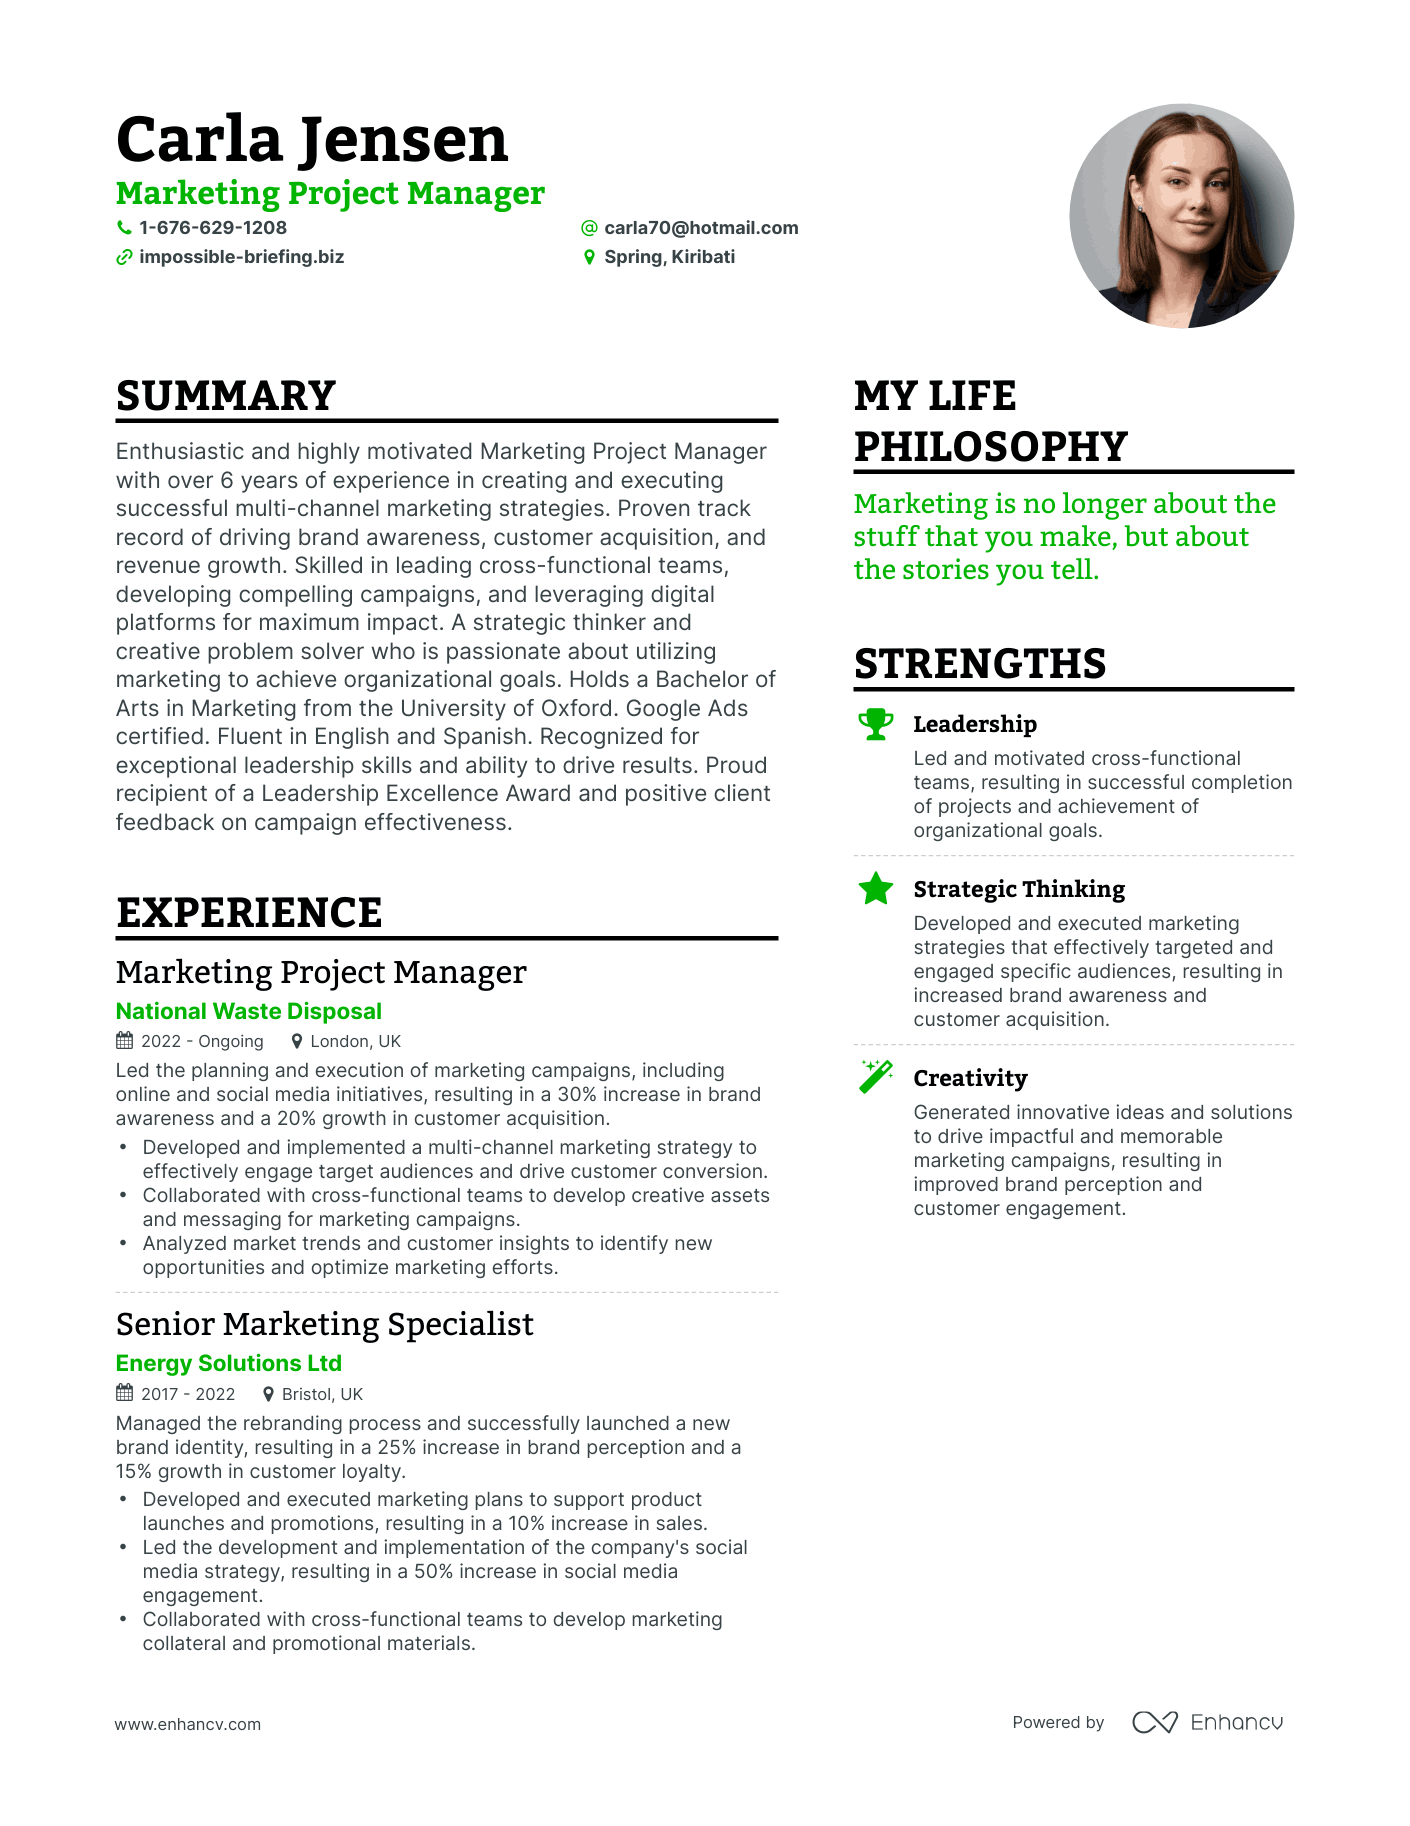 Marketing Project Manager resume example